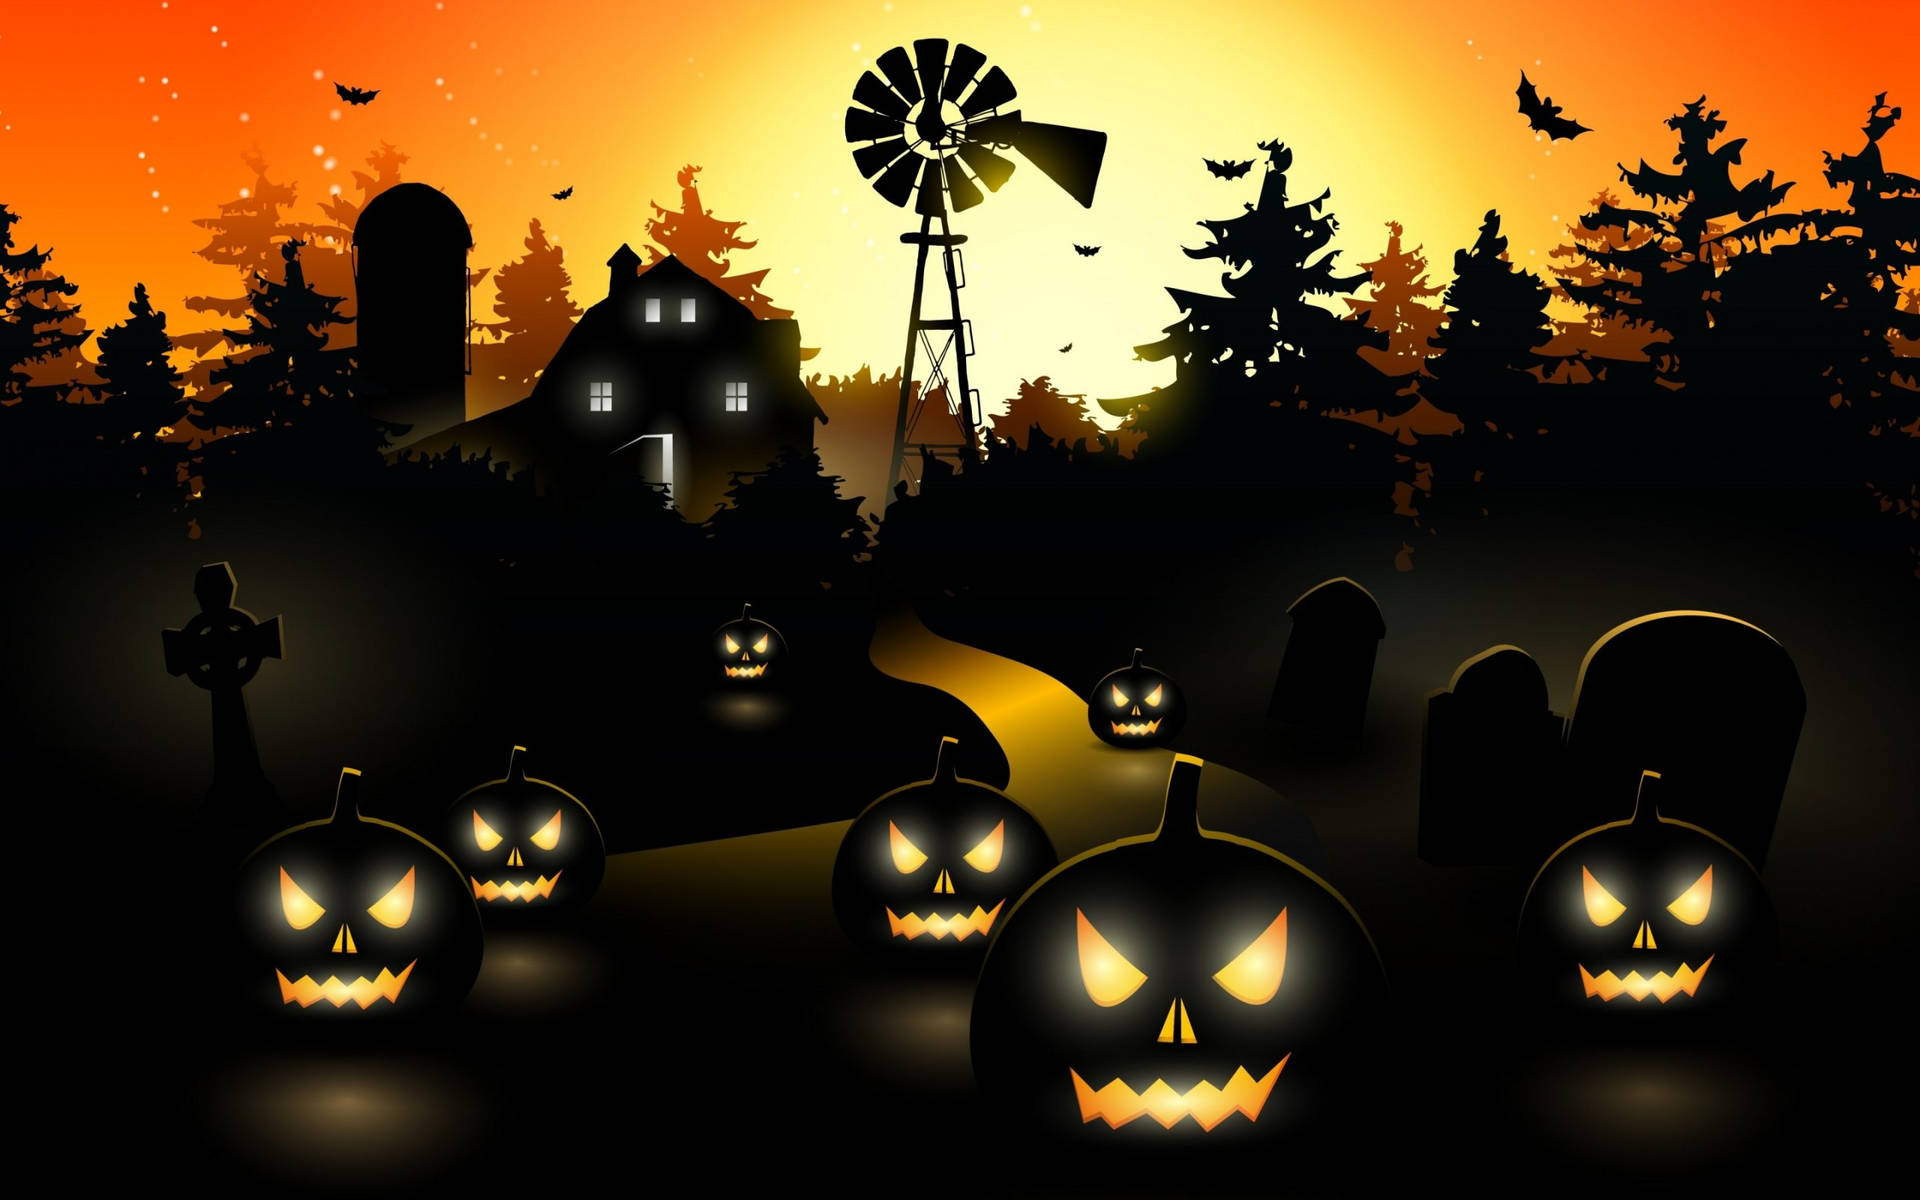 Celebrate Spooky Season with a spooktacular display Wallpaper